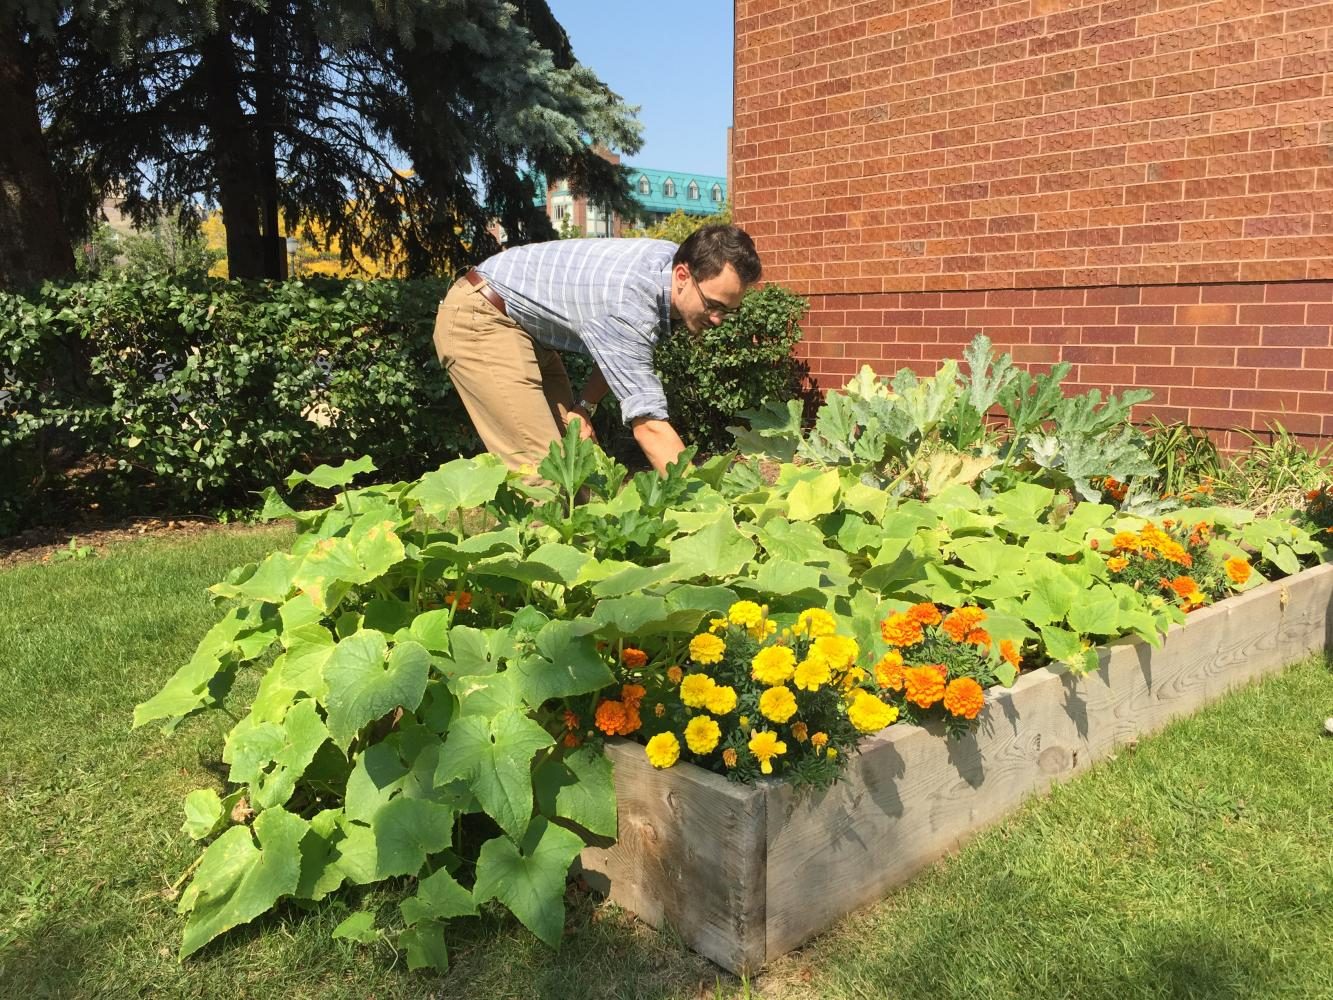 Aidan Flanagan, a senior in the College of Health Sciences, tends to the community garden outside of Weasler Auditorium.